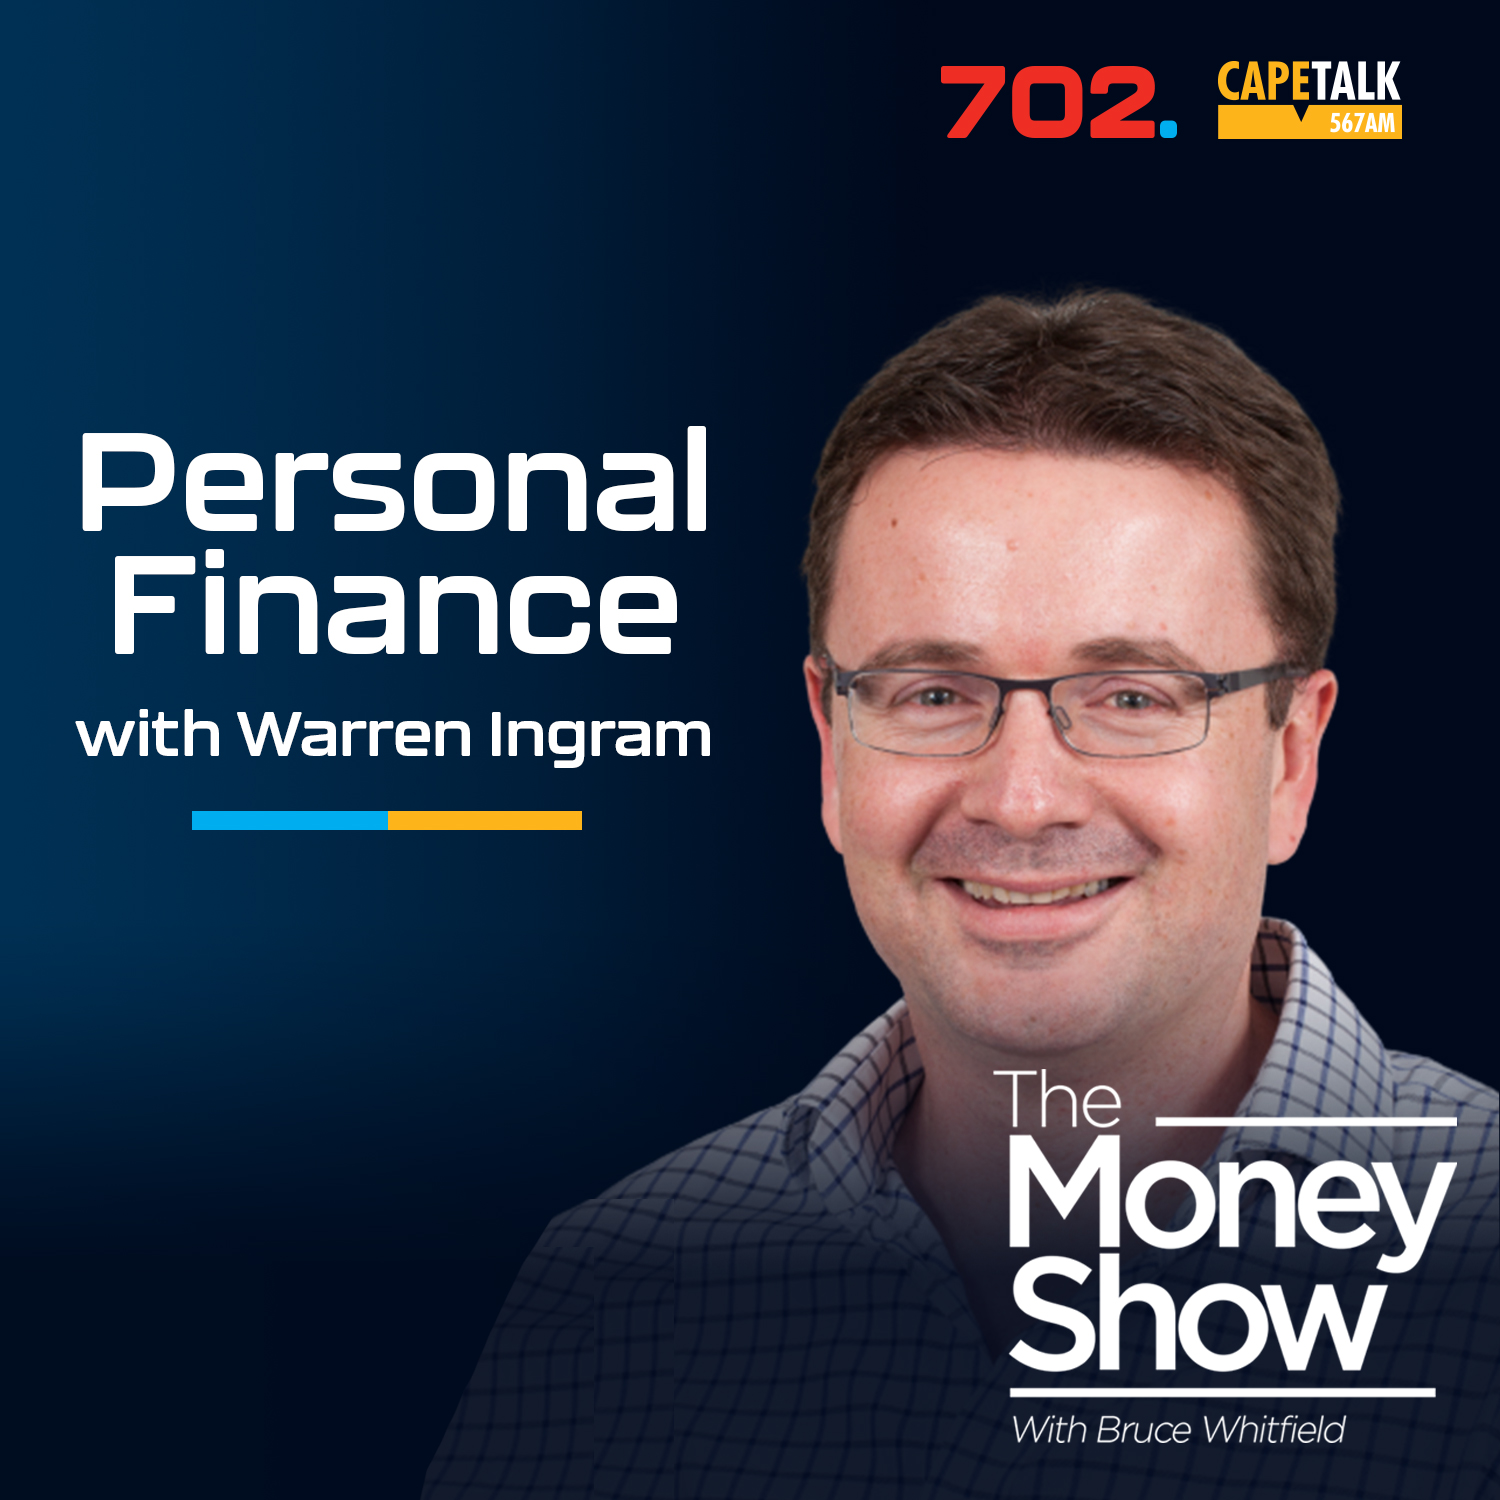 Personal Finance - What are the three most valuable principles every investor should follow if they want to grow their wealth?